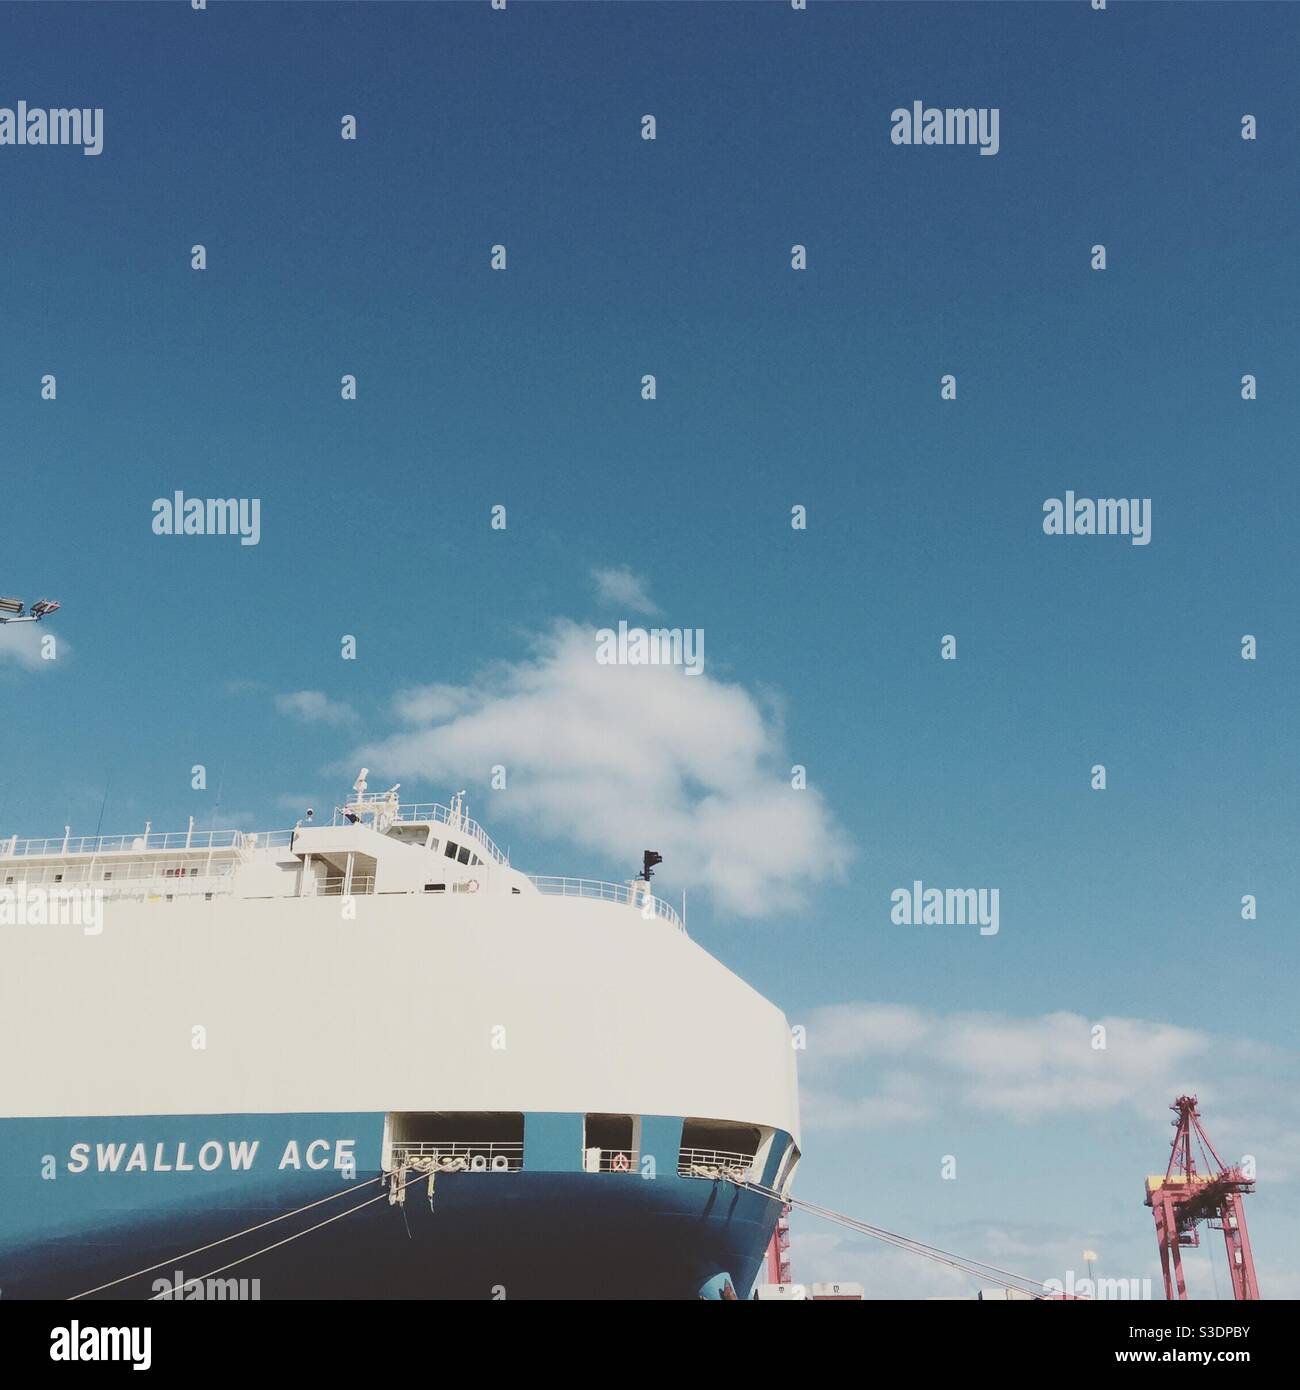 Ship in port with cranes and blue skies Stock Photo